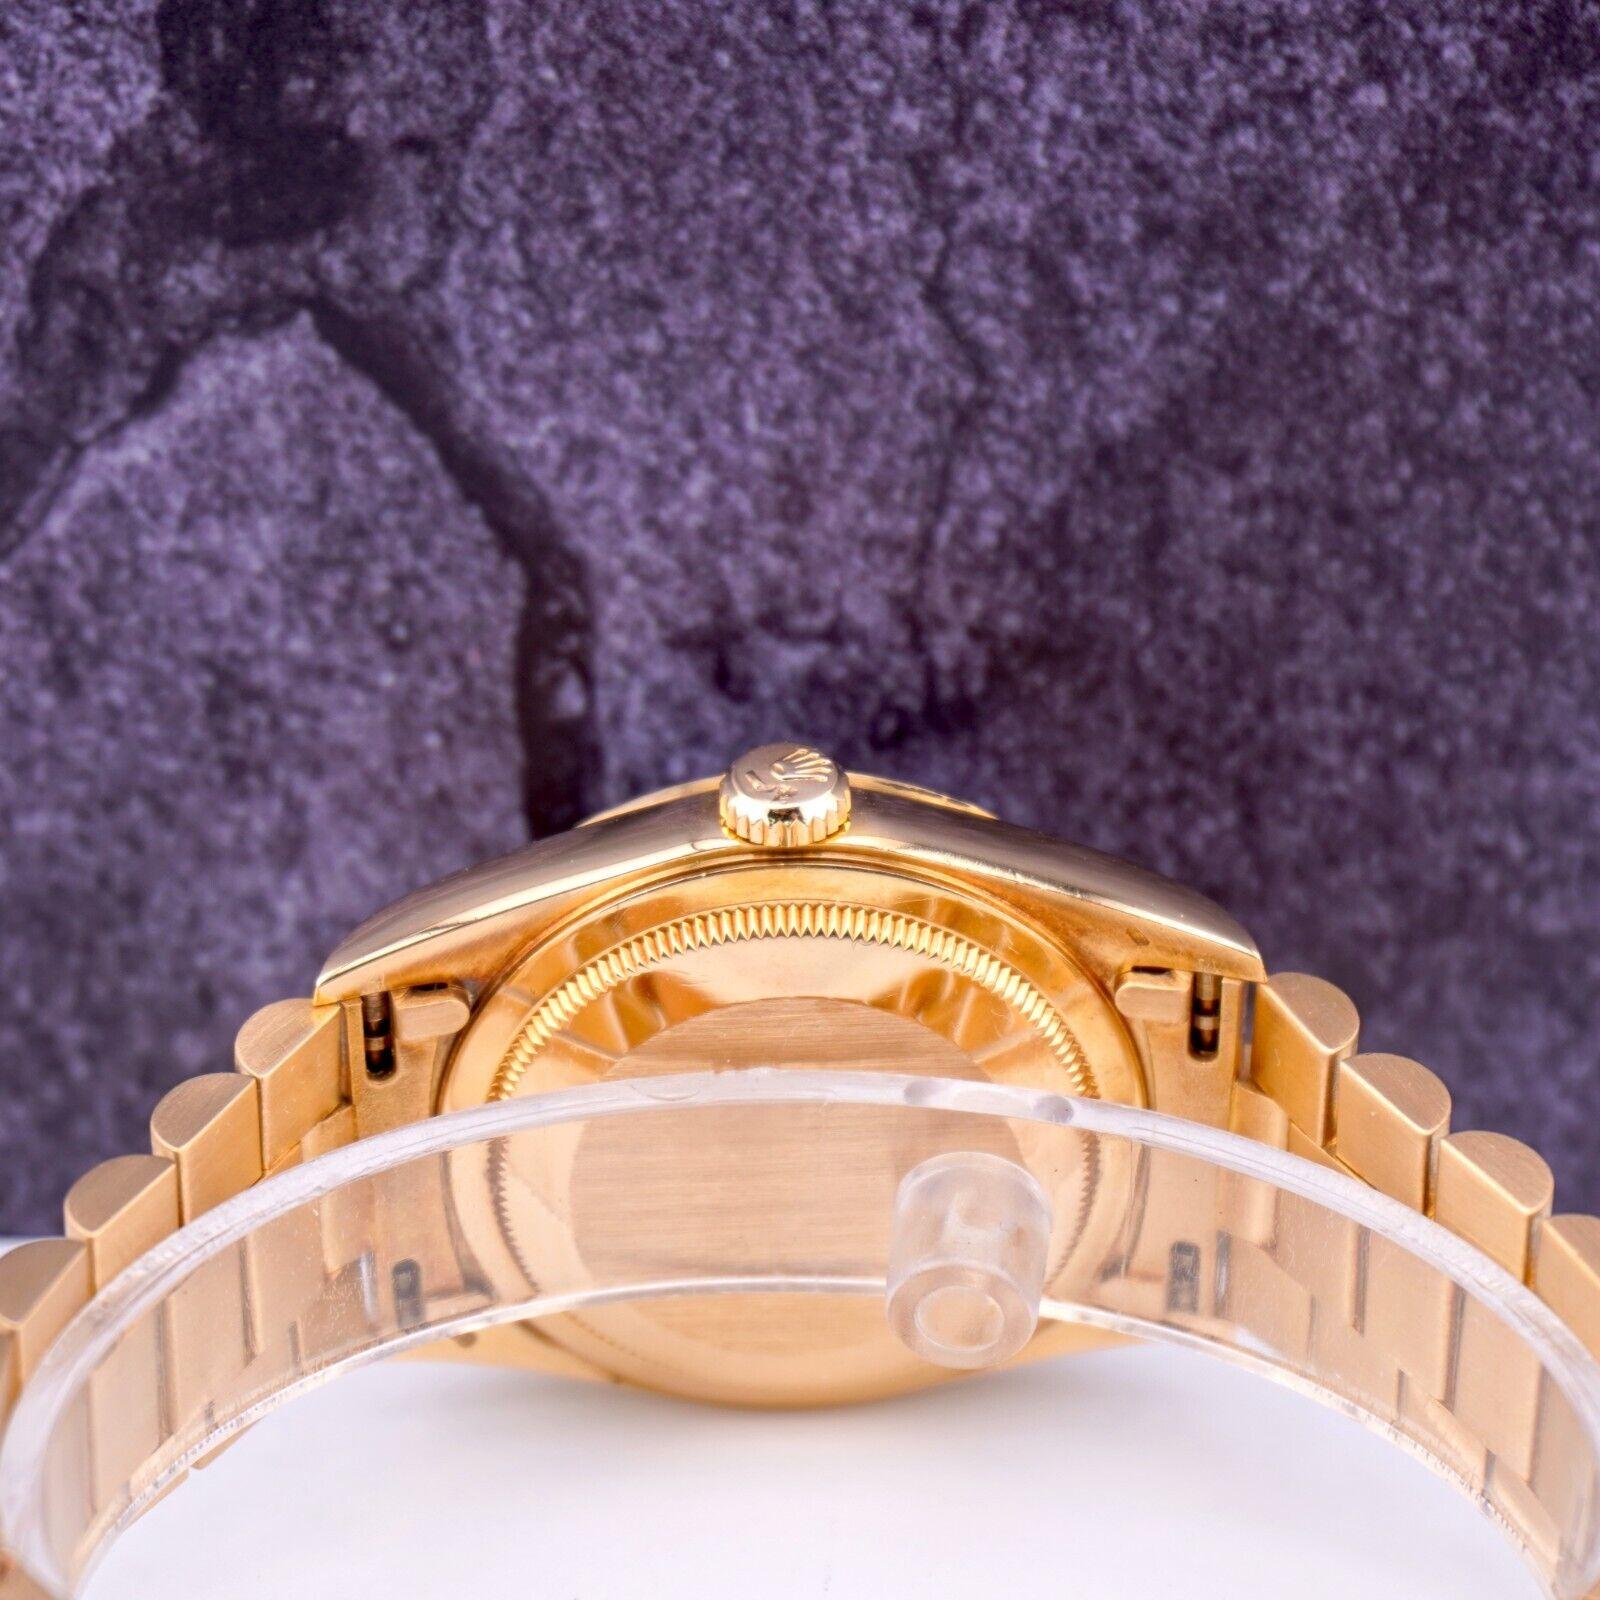 Round Cut Rolex DAY-DATE 36mm President Men's 18K Yellow Gold Diamond Dial Watch Ref 18248 For Sale